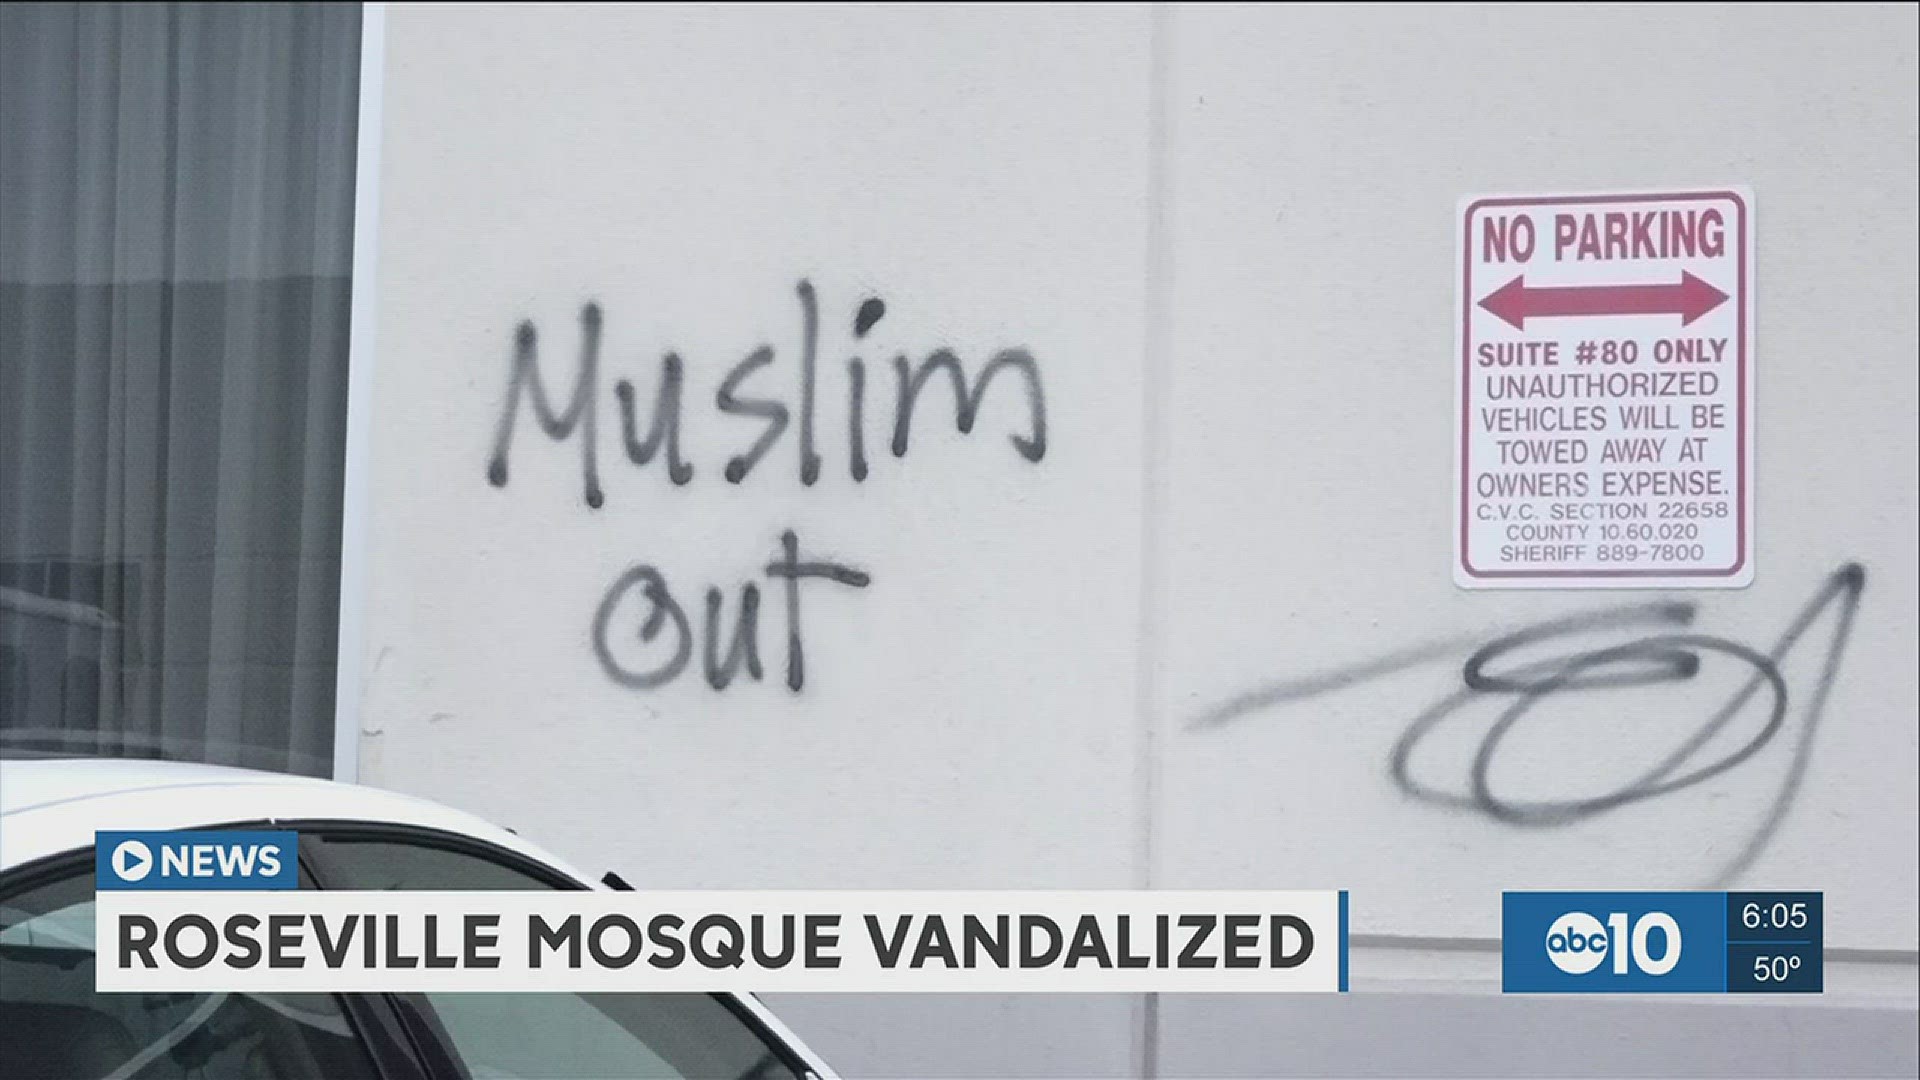 Members of a mosque in Roseville are cleaning up after it was vandalized on Tuesday. (Feb. 1, 2017)